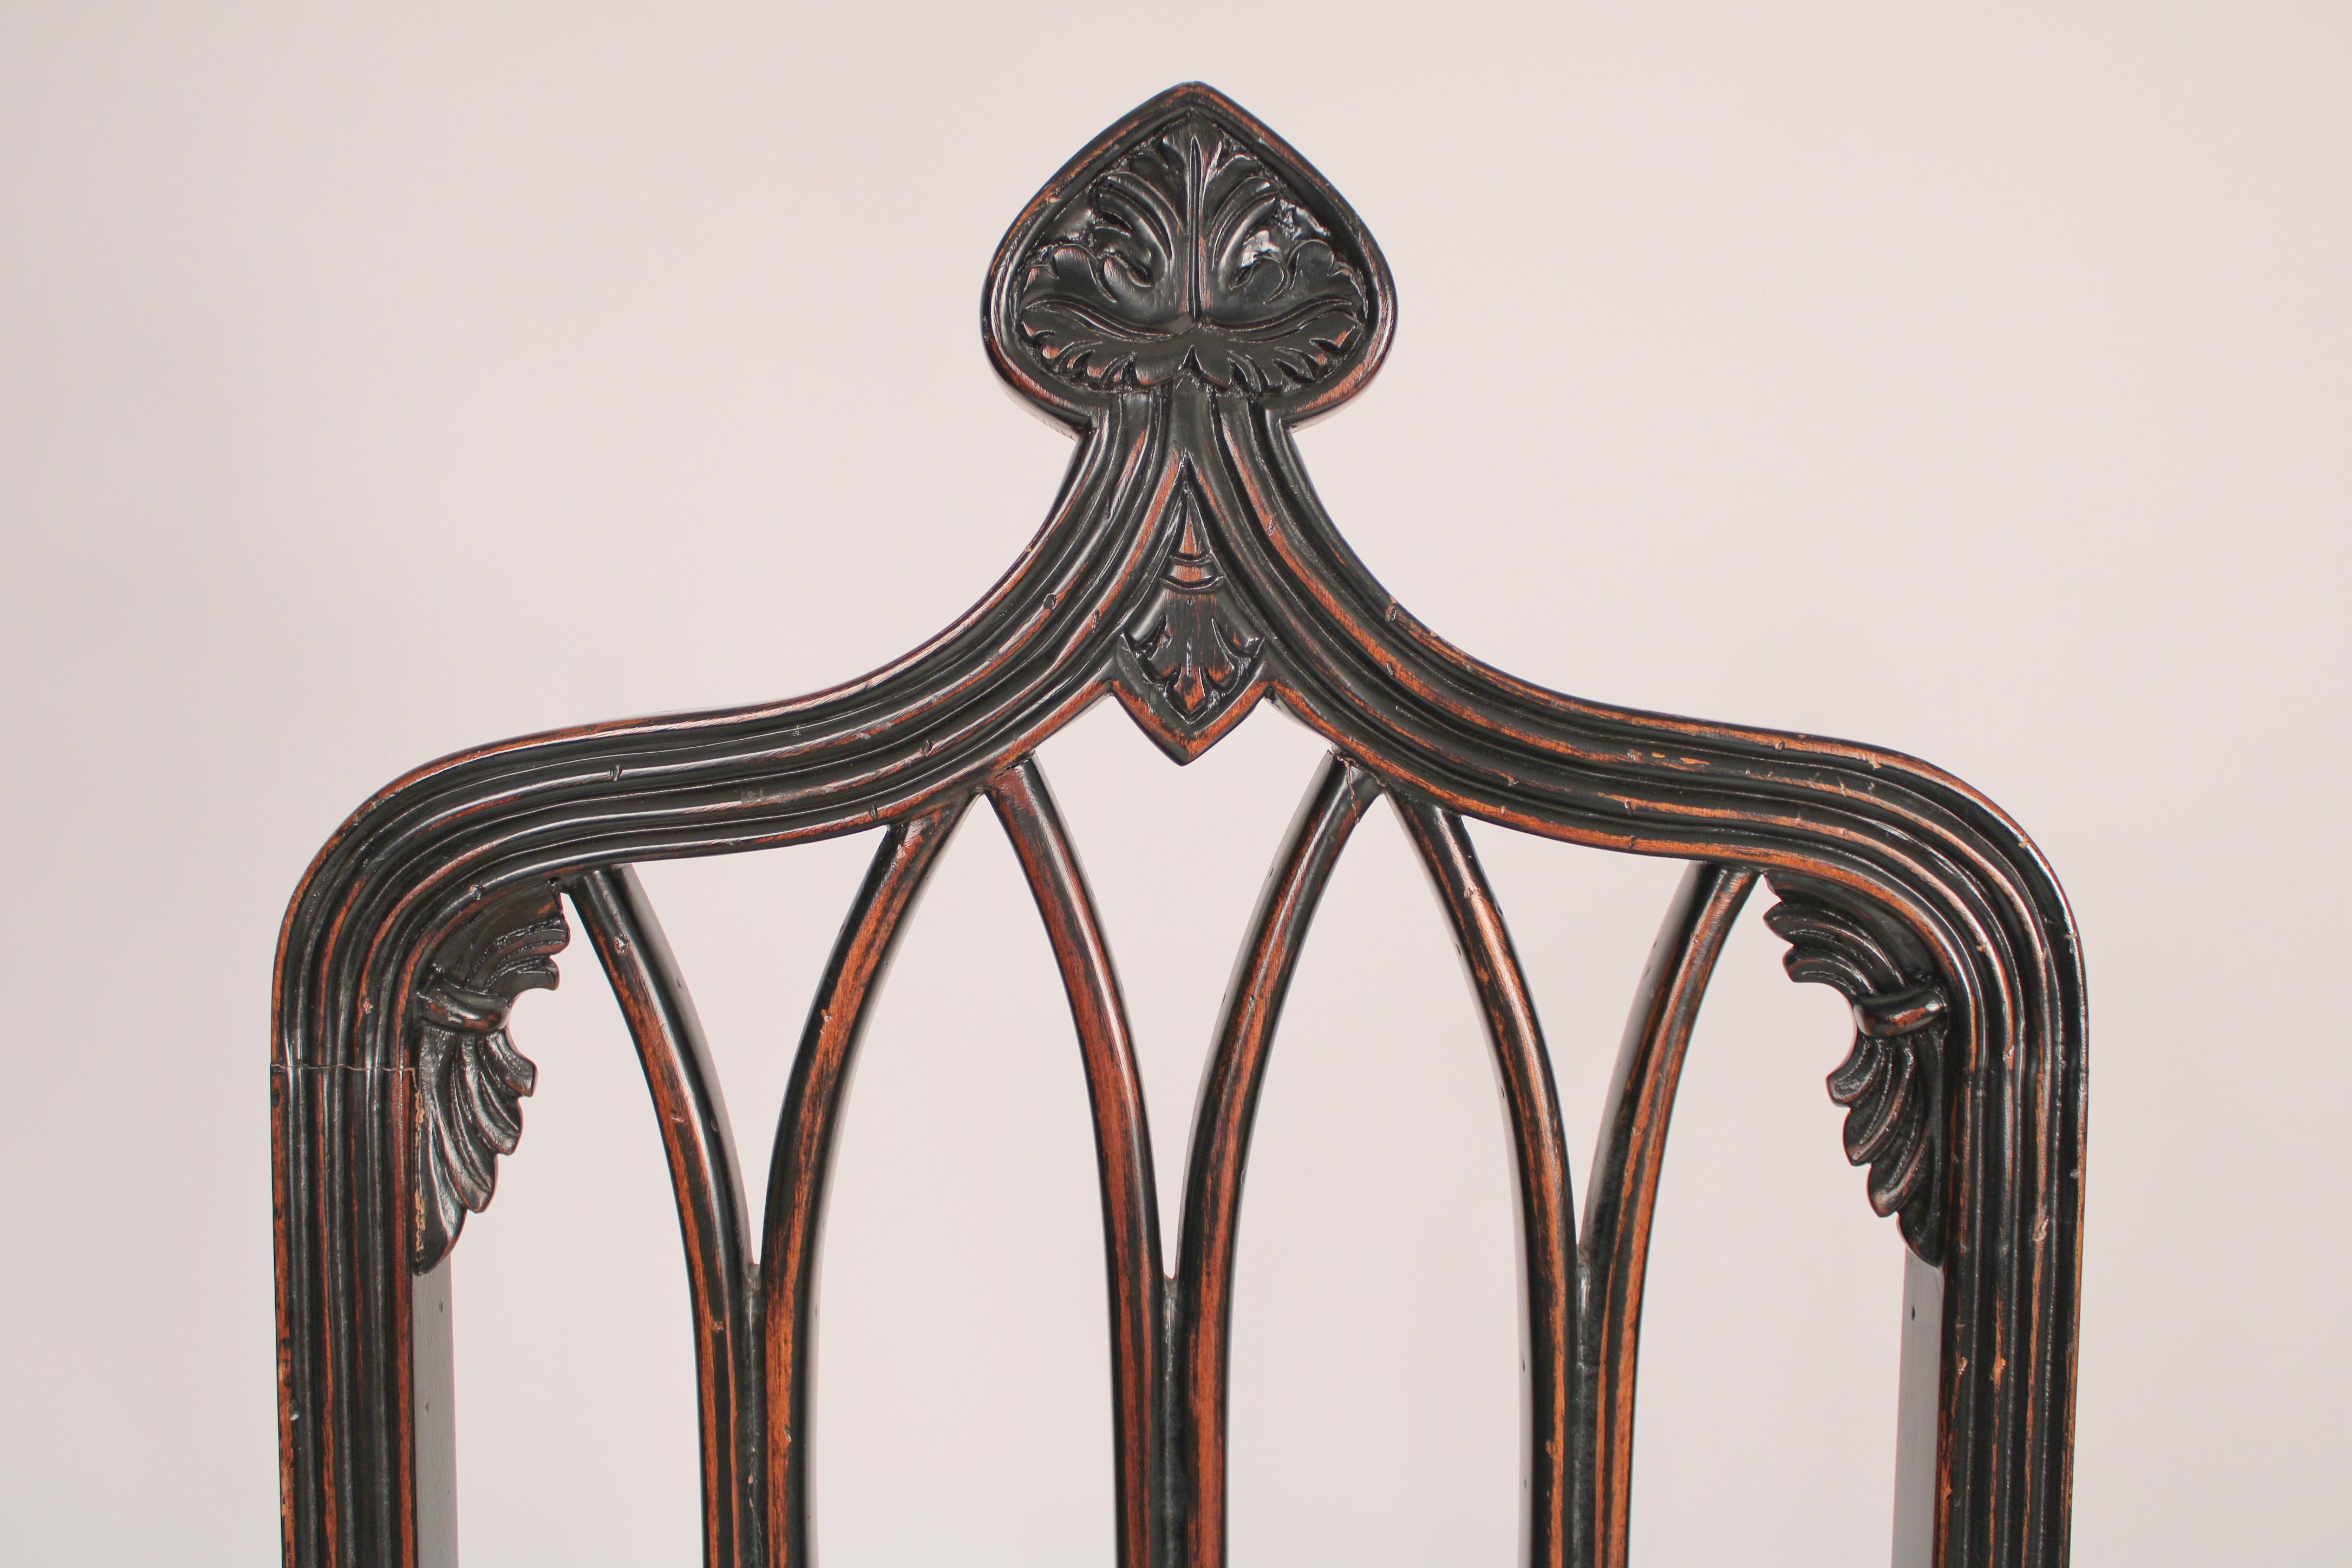 Set of 6 Gothic Revival Style Dining Room Chairs 1